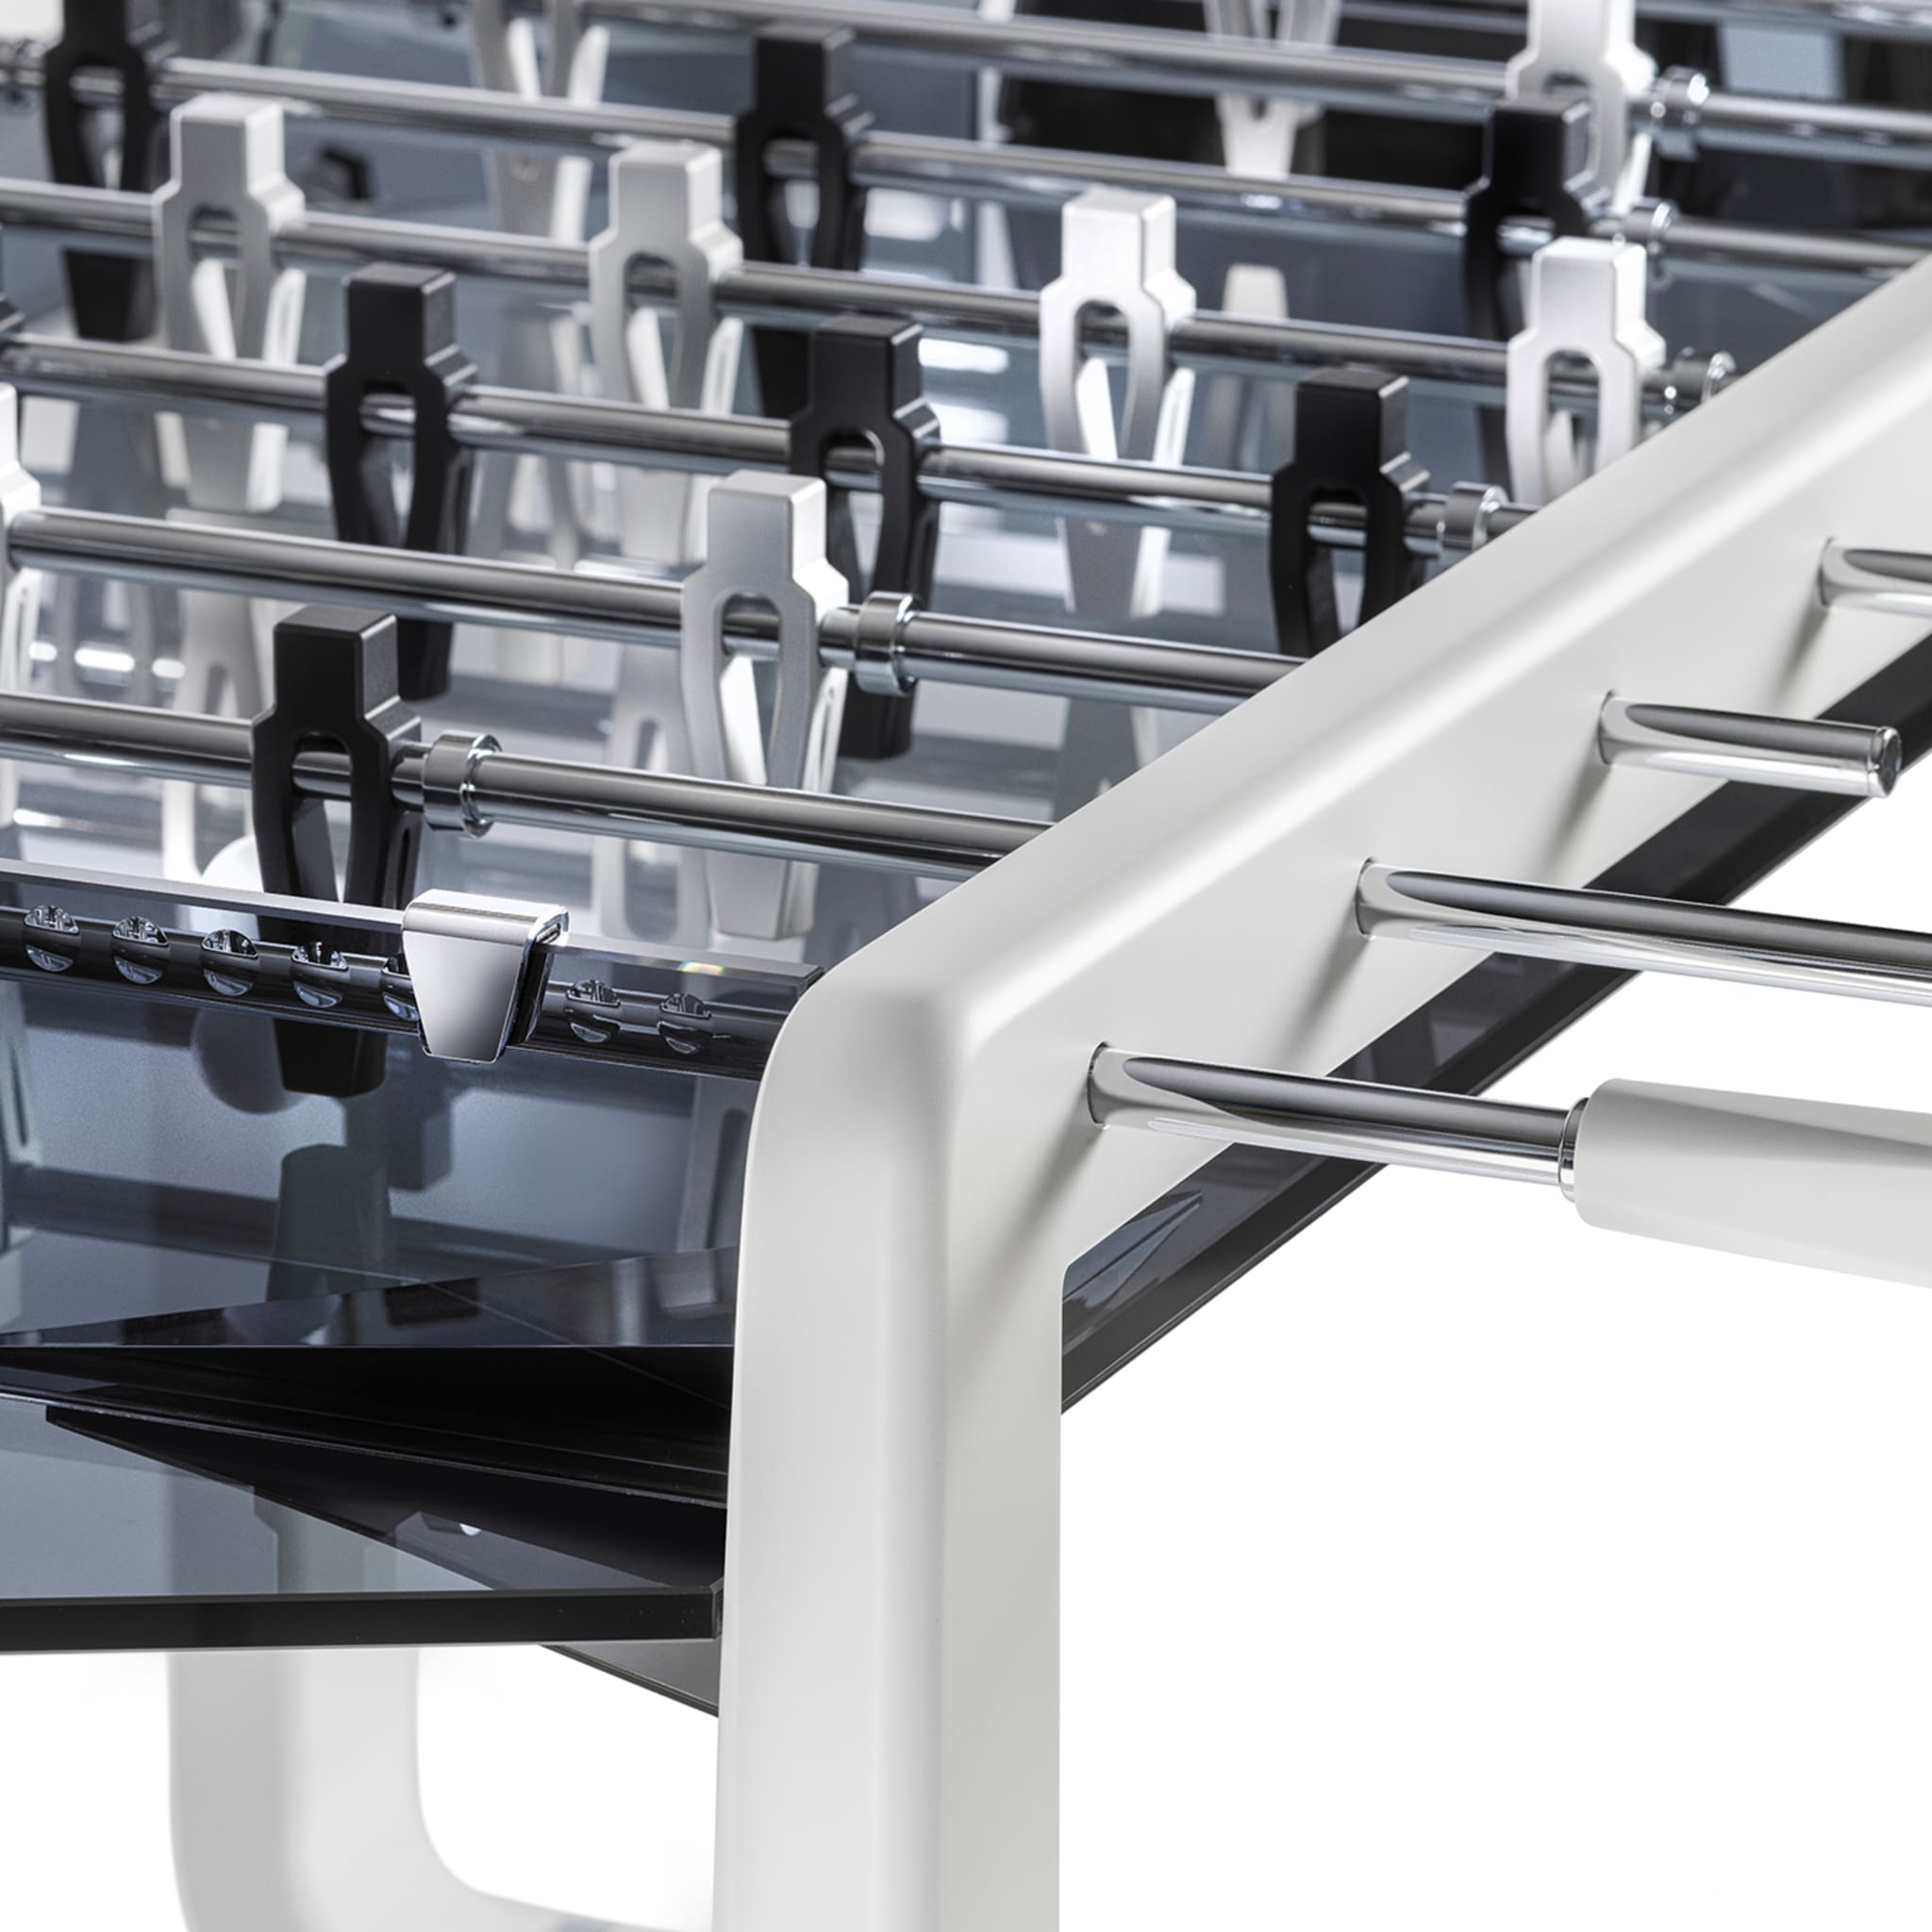 Derby Canvas Smoked Glass Foosball Table - Alternative view 3